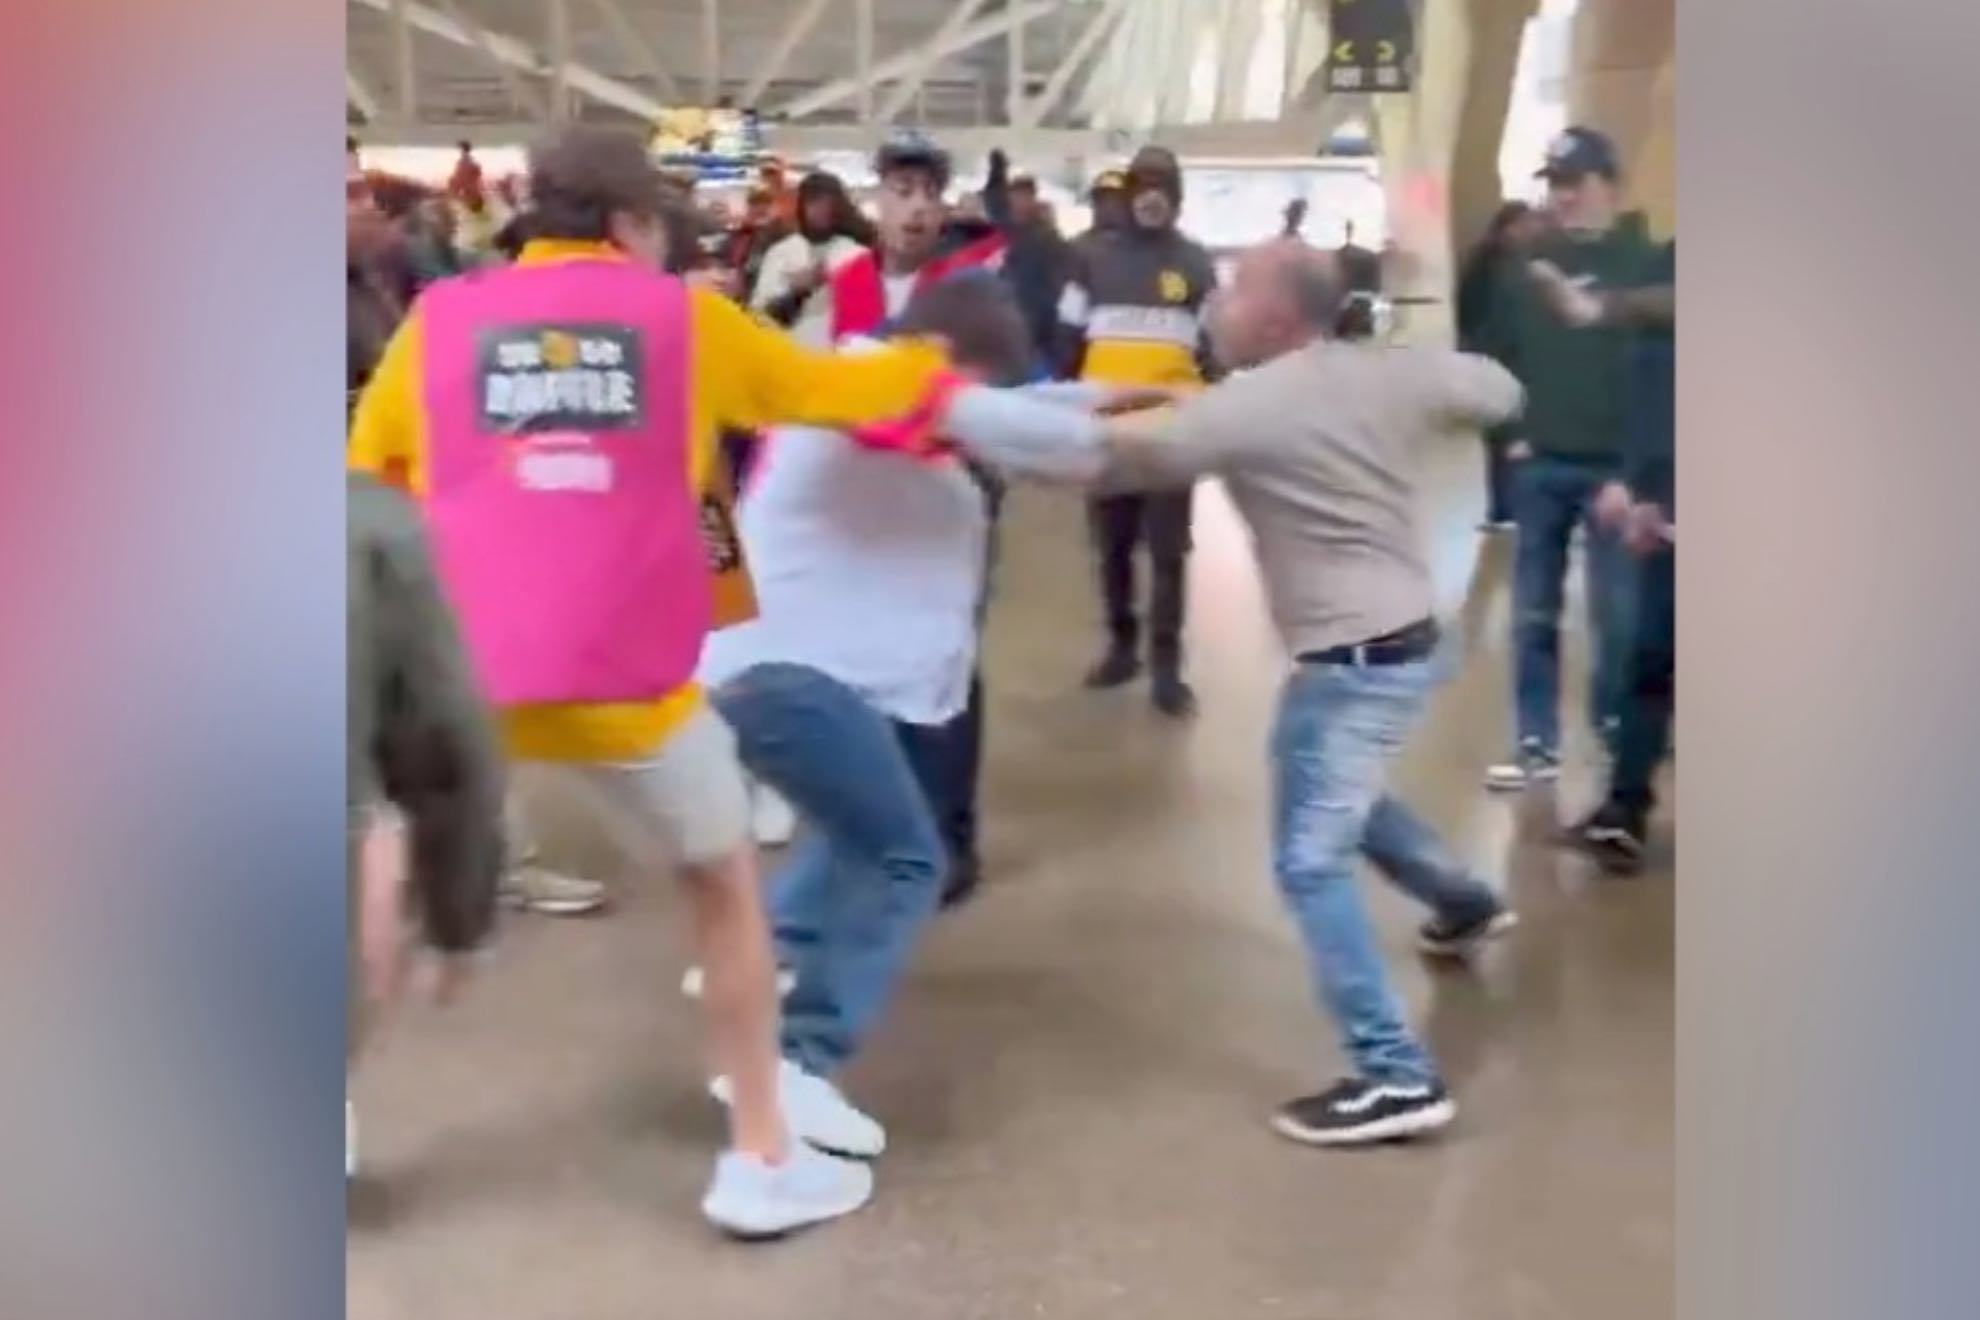 Padres and Giants fans were involved in an ugly brawl at the MLB game